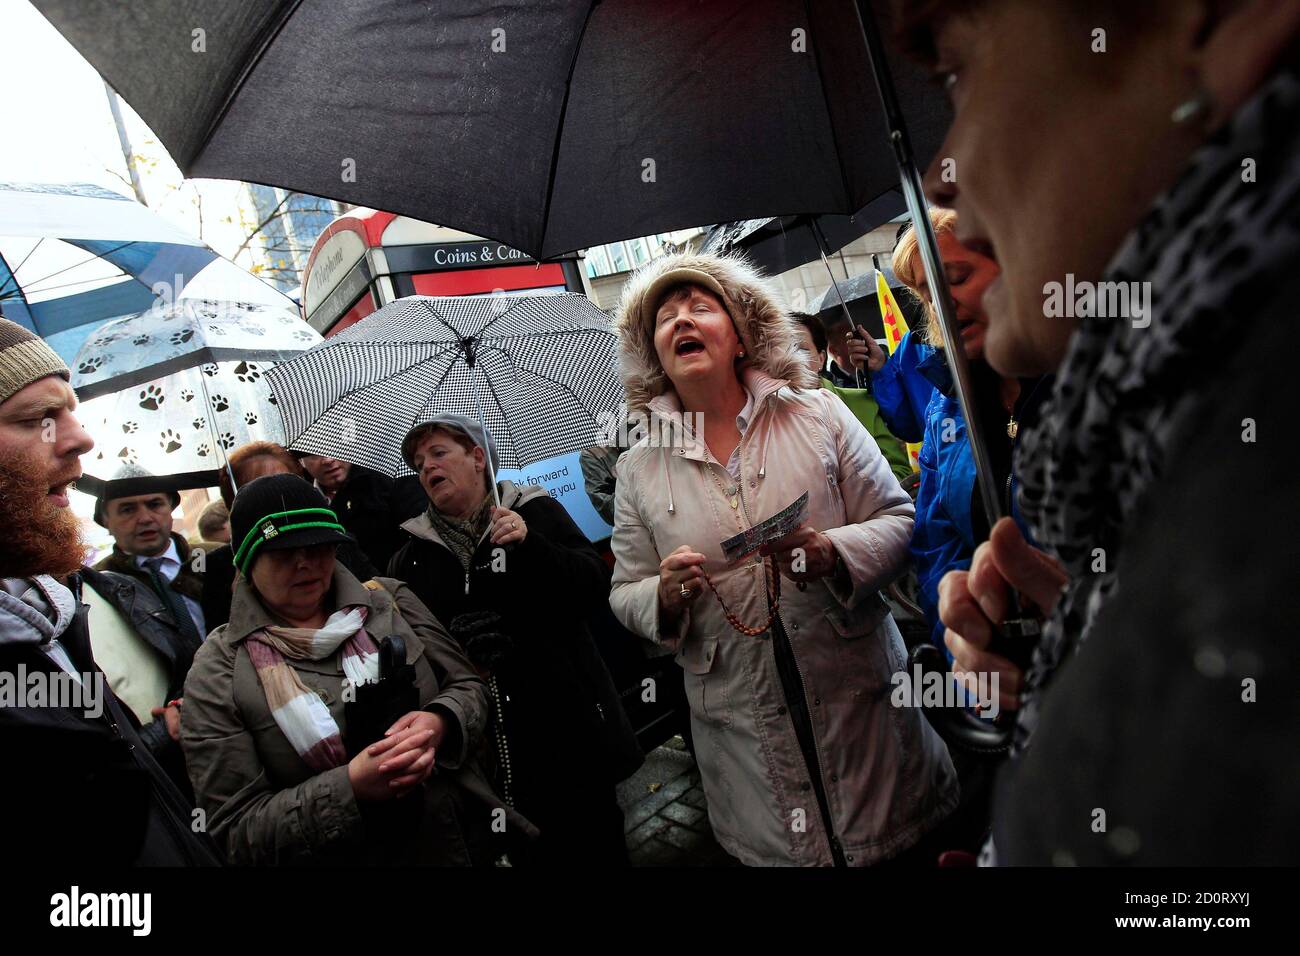 Pro-life campaigners sing hymns during a protest outside the Marie Stopes clinic in Belfast October 18, 2012. The first private clinic offering abortions opened in Northern Ireland on Thursday, making access to abortion much easier for women in both Northern Ireland and the Republic of Ireland.    REUTERS/Cathal McNaughton   (NORTHERN IRELAND - Tags: HEALTH SOCIETY RELIGION) Stock Photo